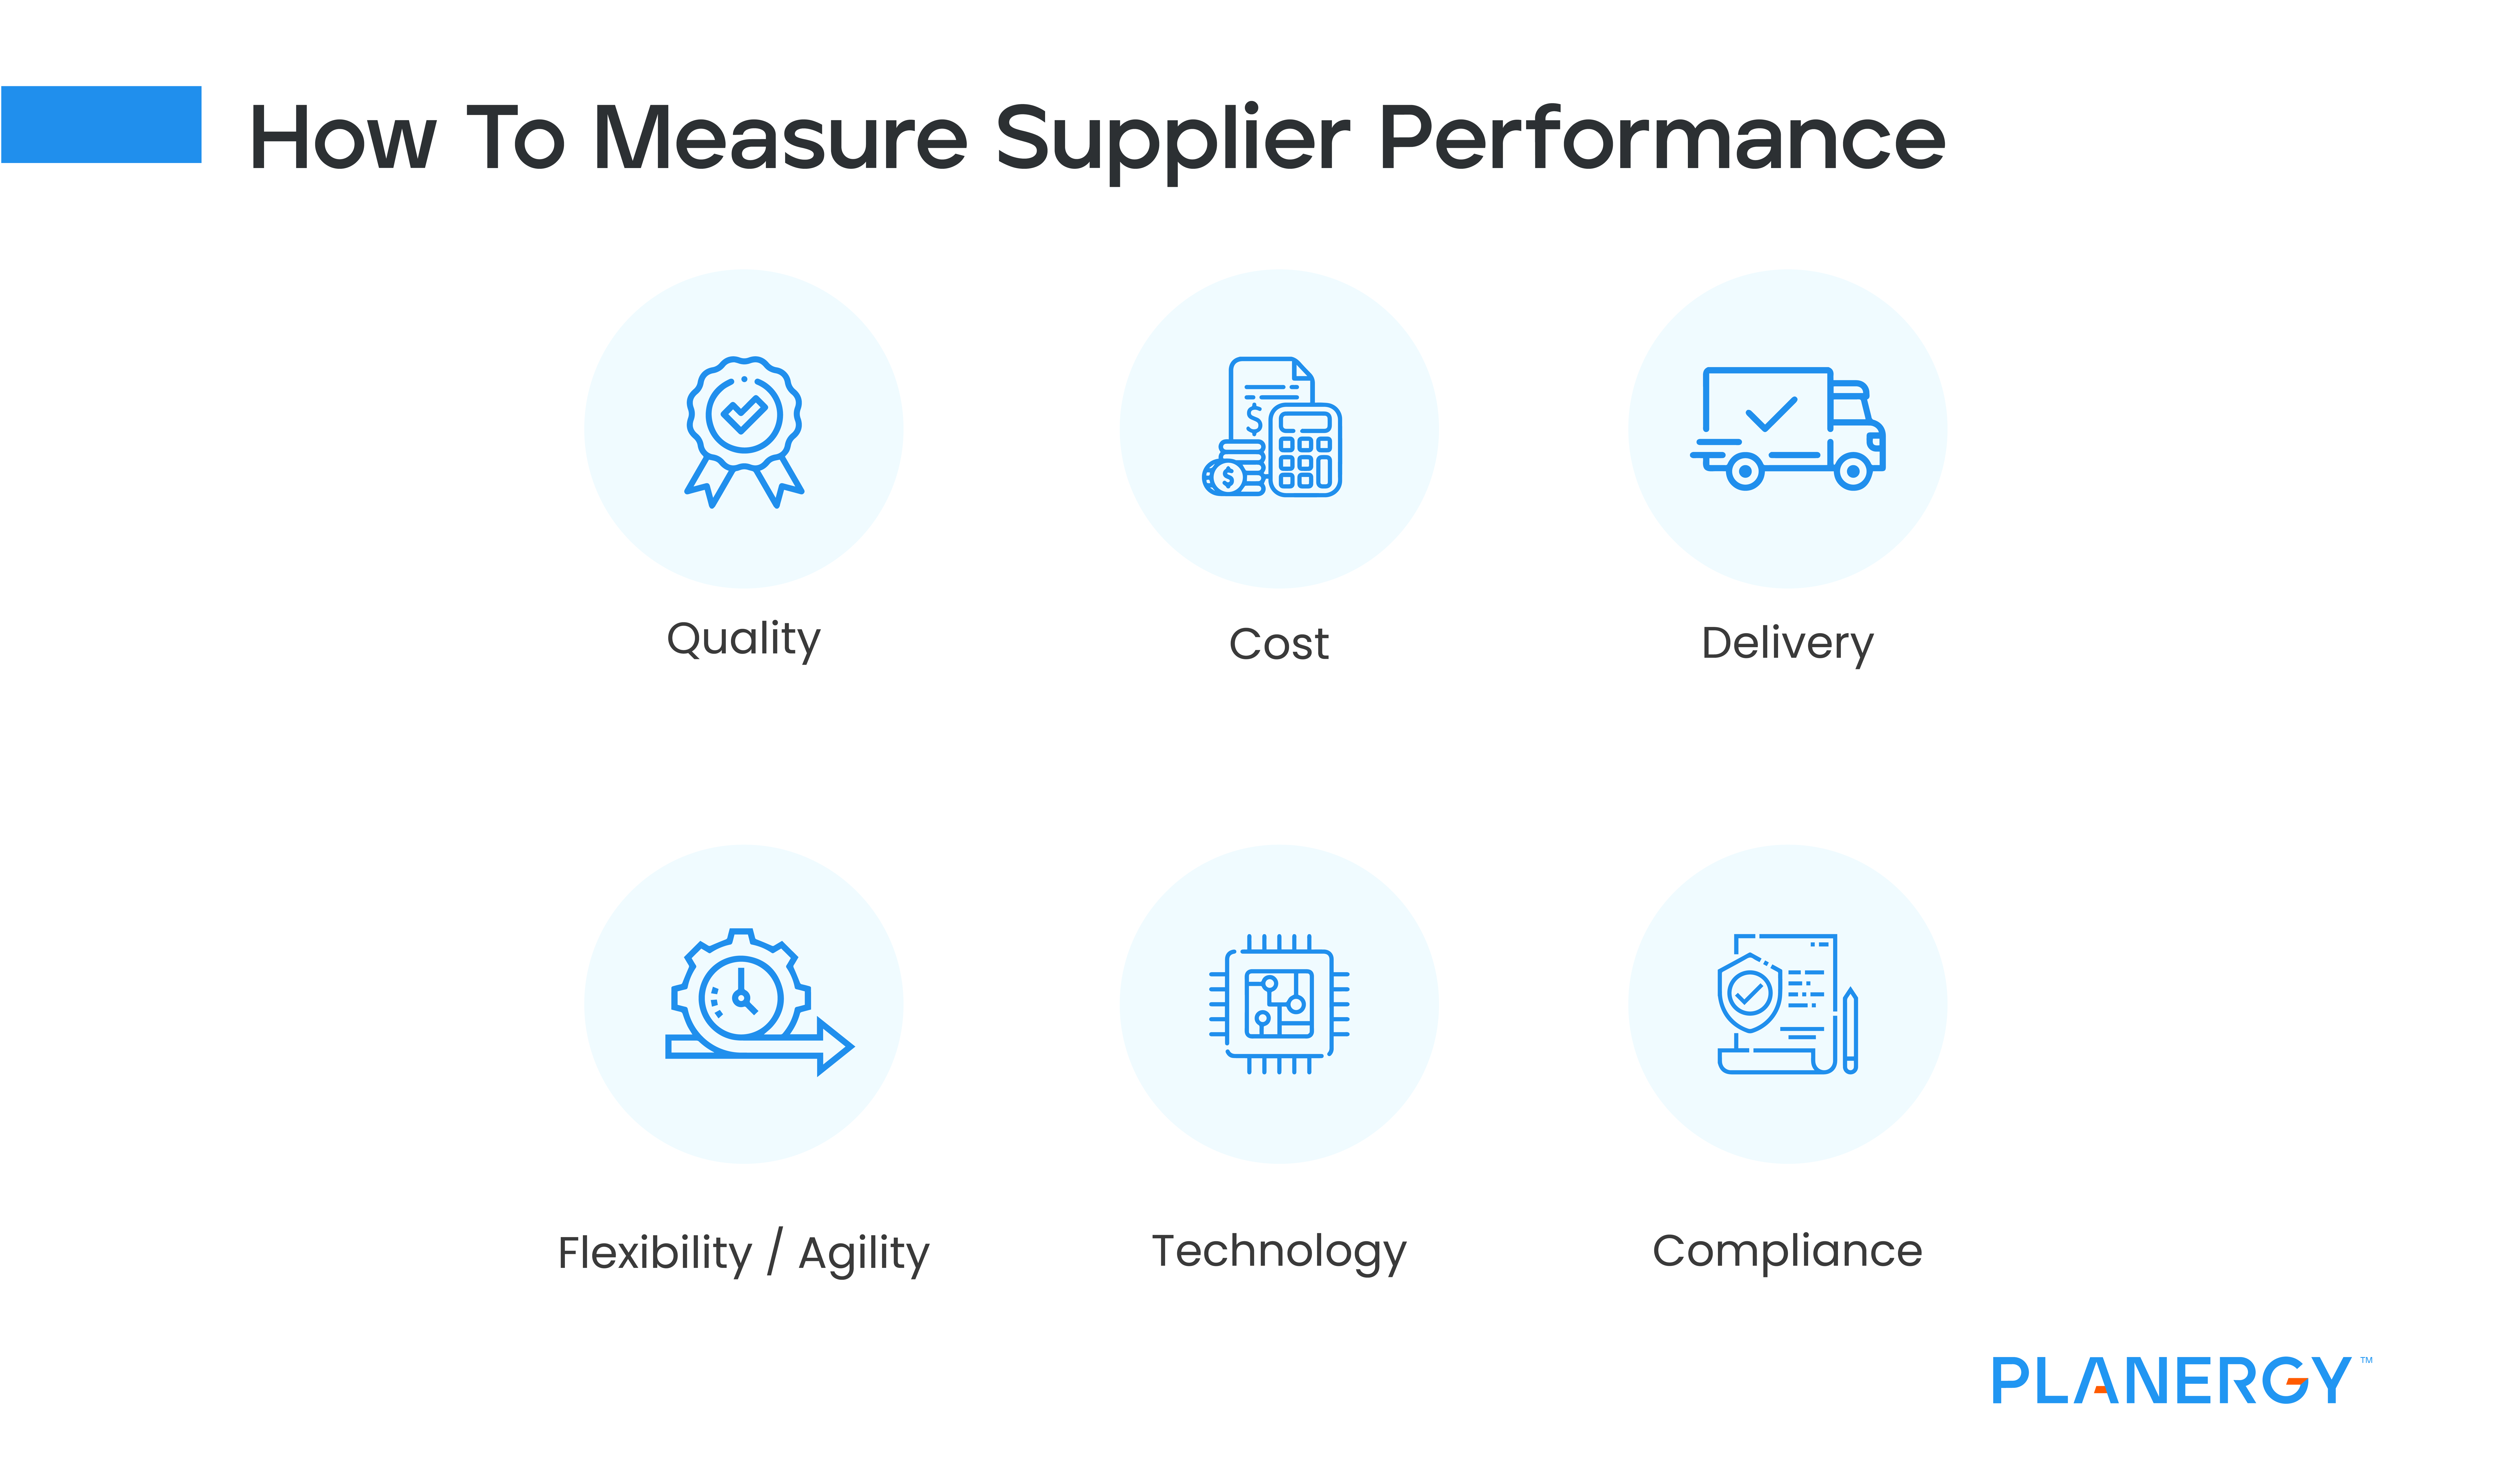 How to Measure Supplier Performance